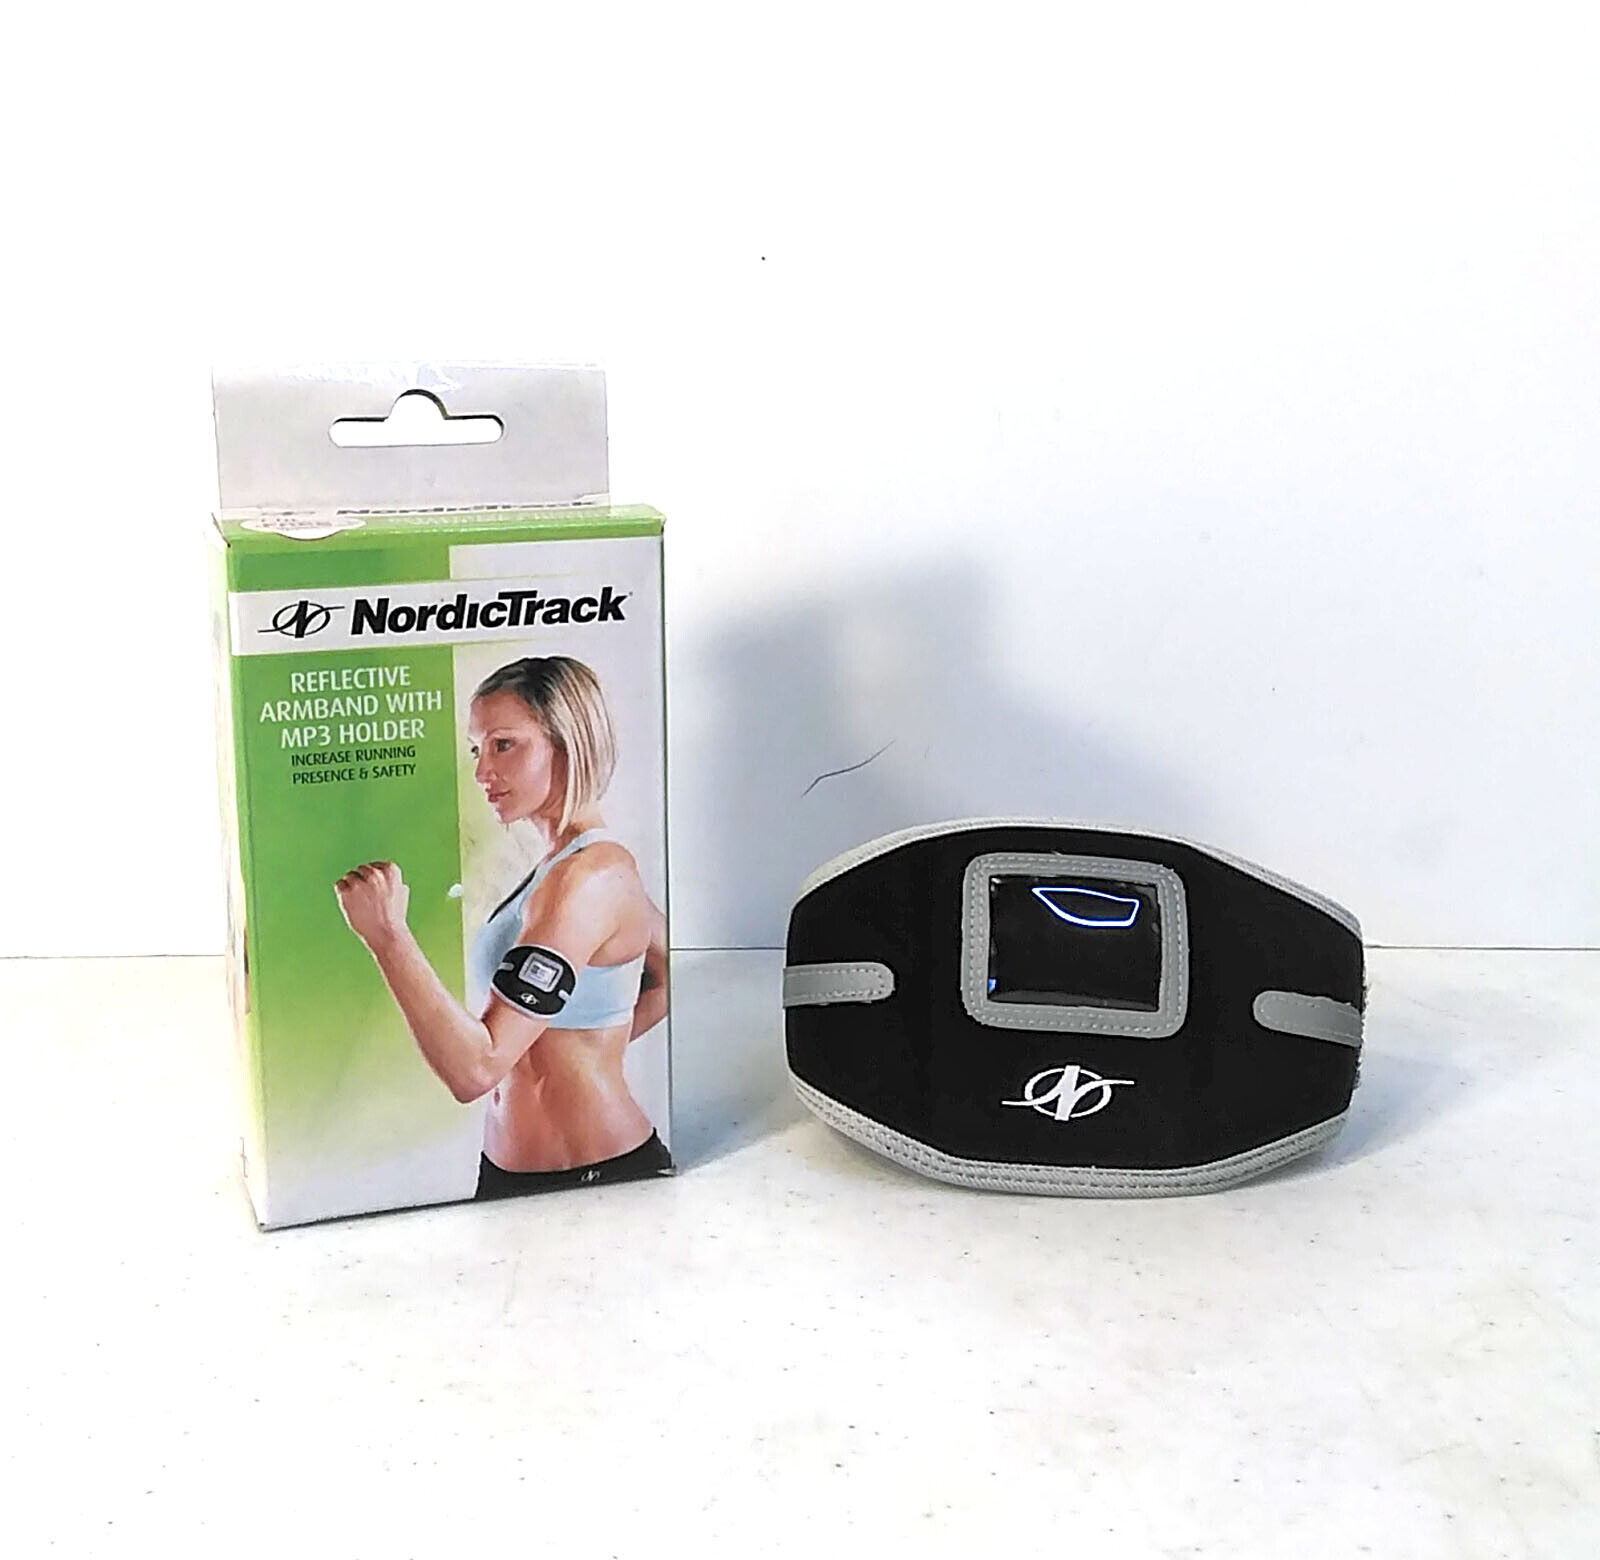 Nordictrack Reflective Armband With Mp3 Holder